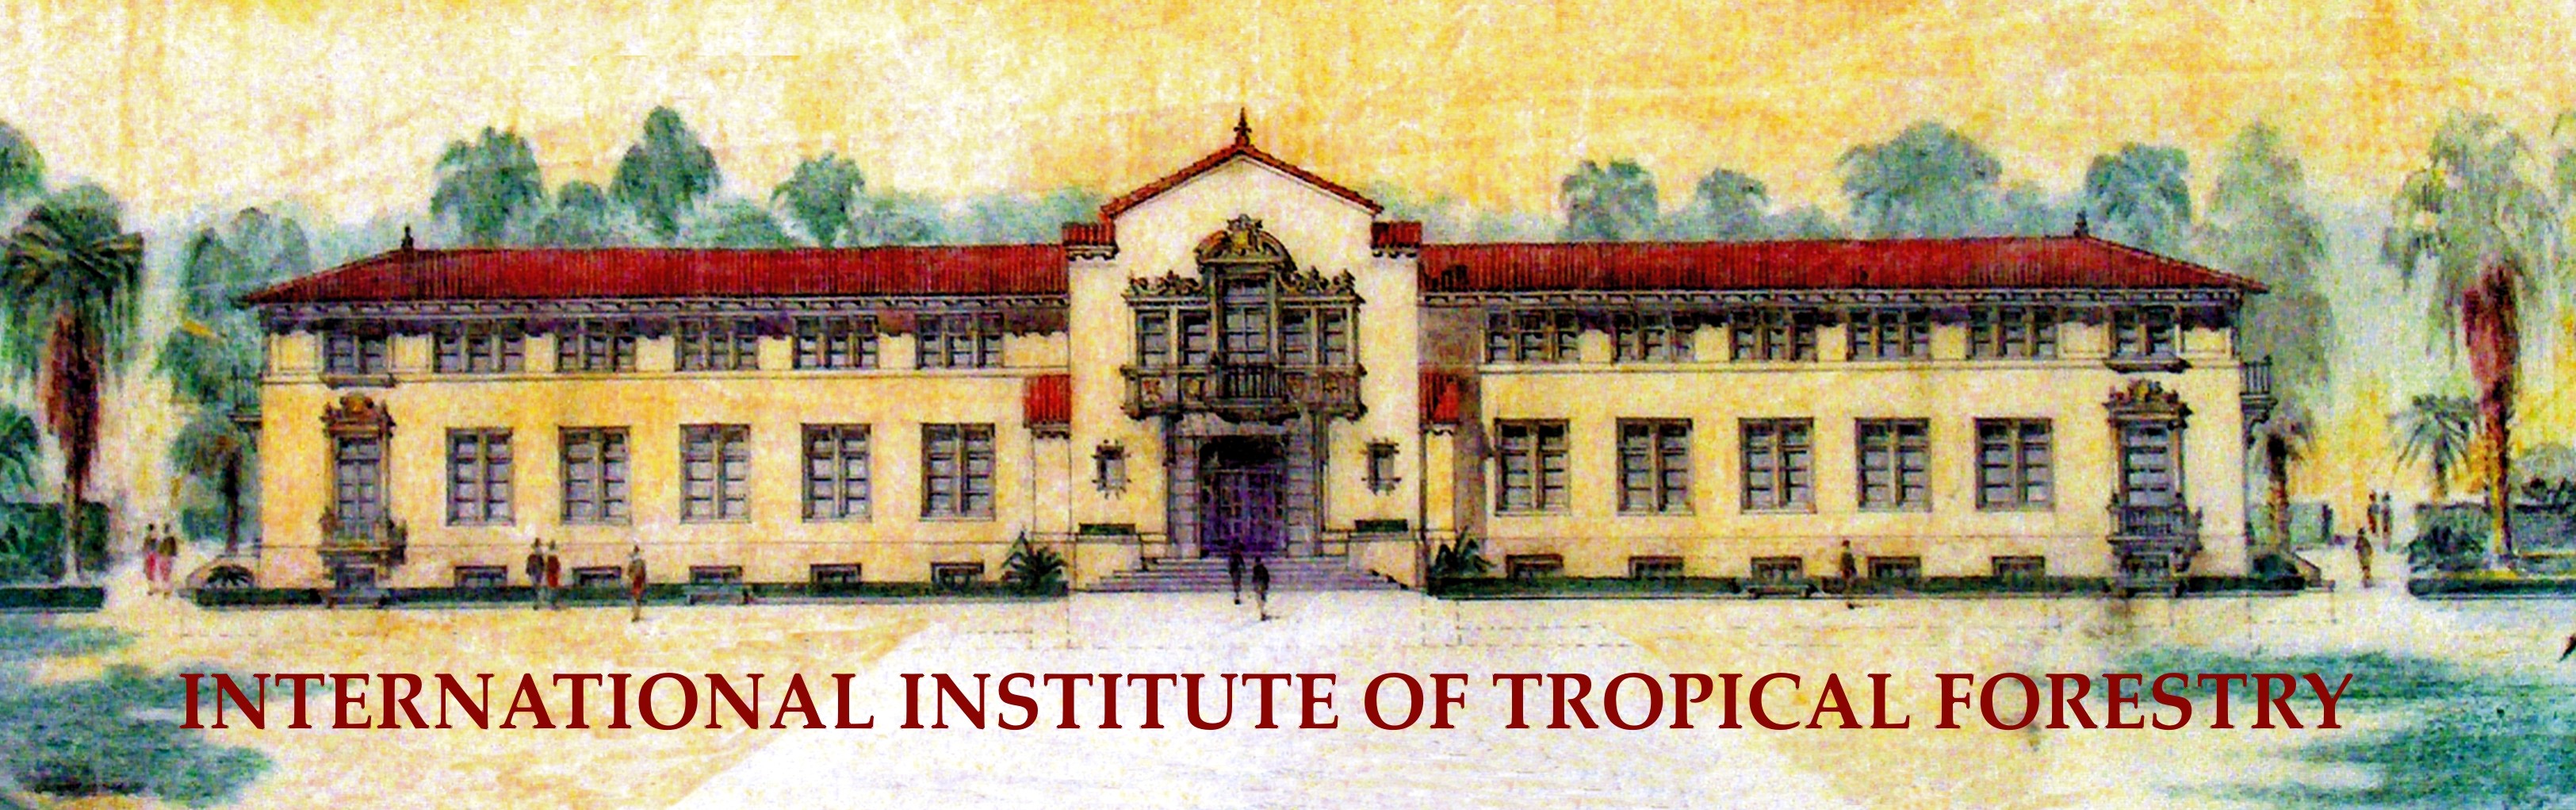 International Institute of Tropical Forestry  Logo